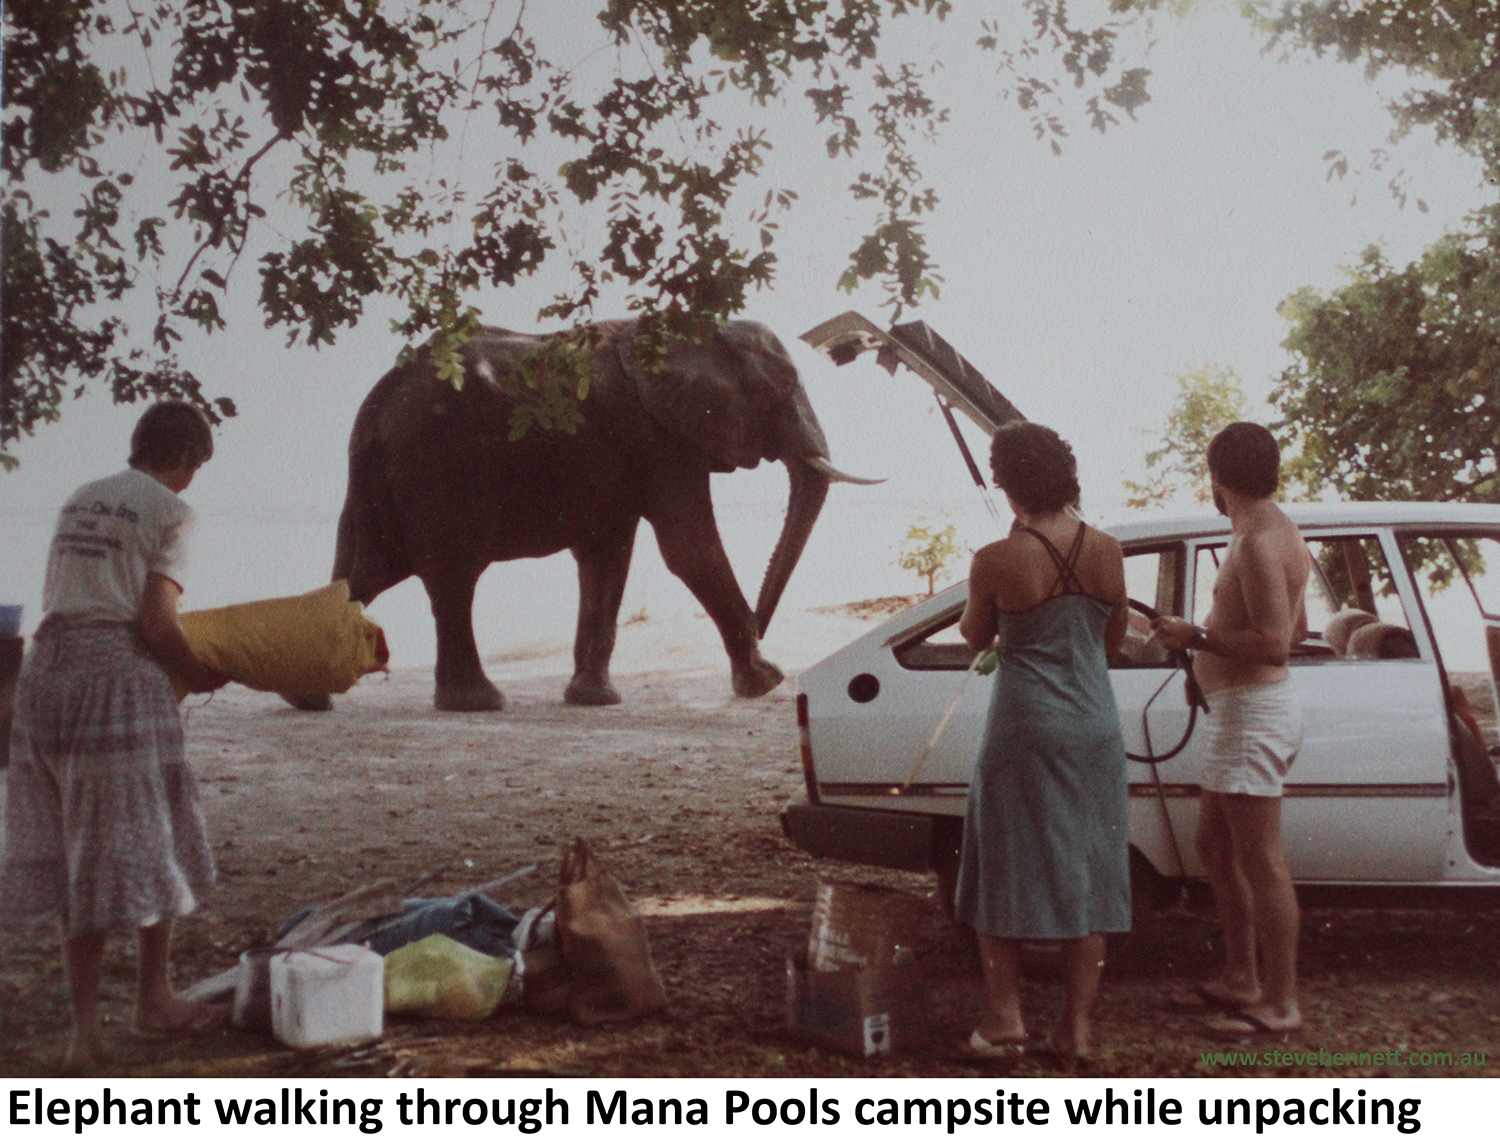 Elephant wandering through the unfenced campsite at Mana Pools while campers unpack their car